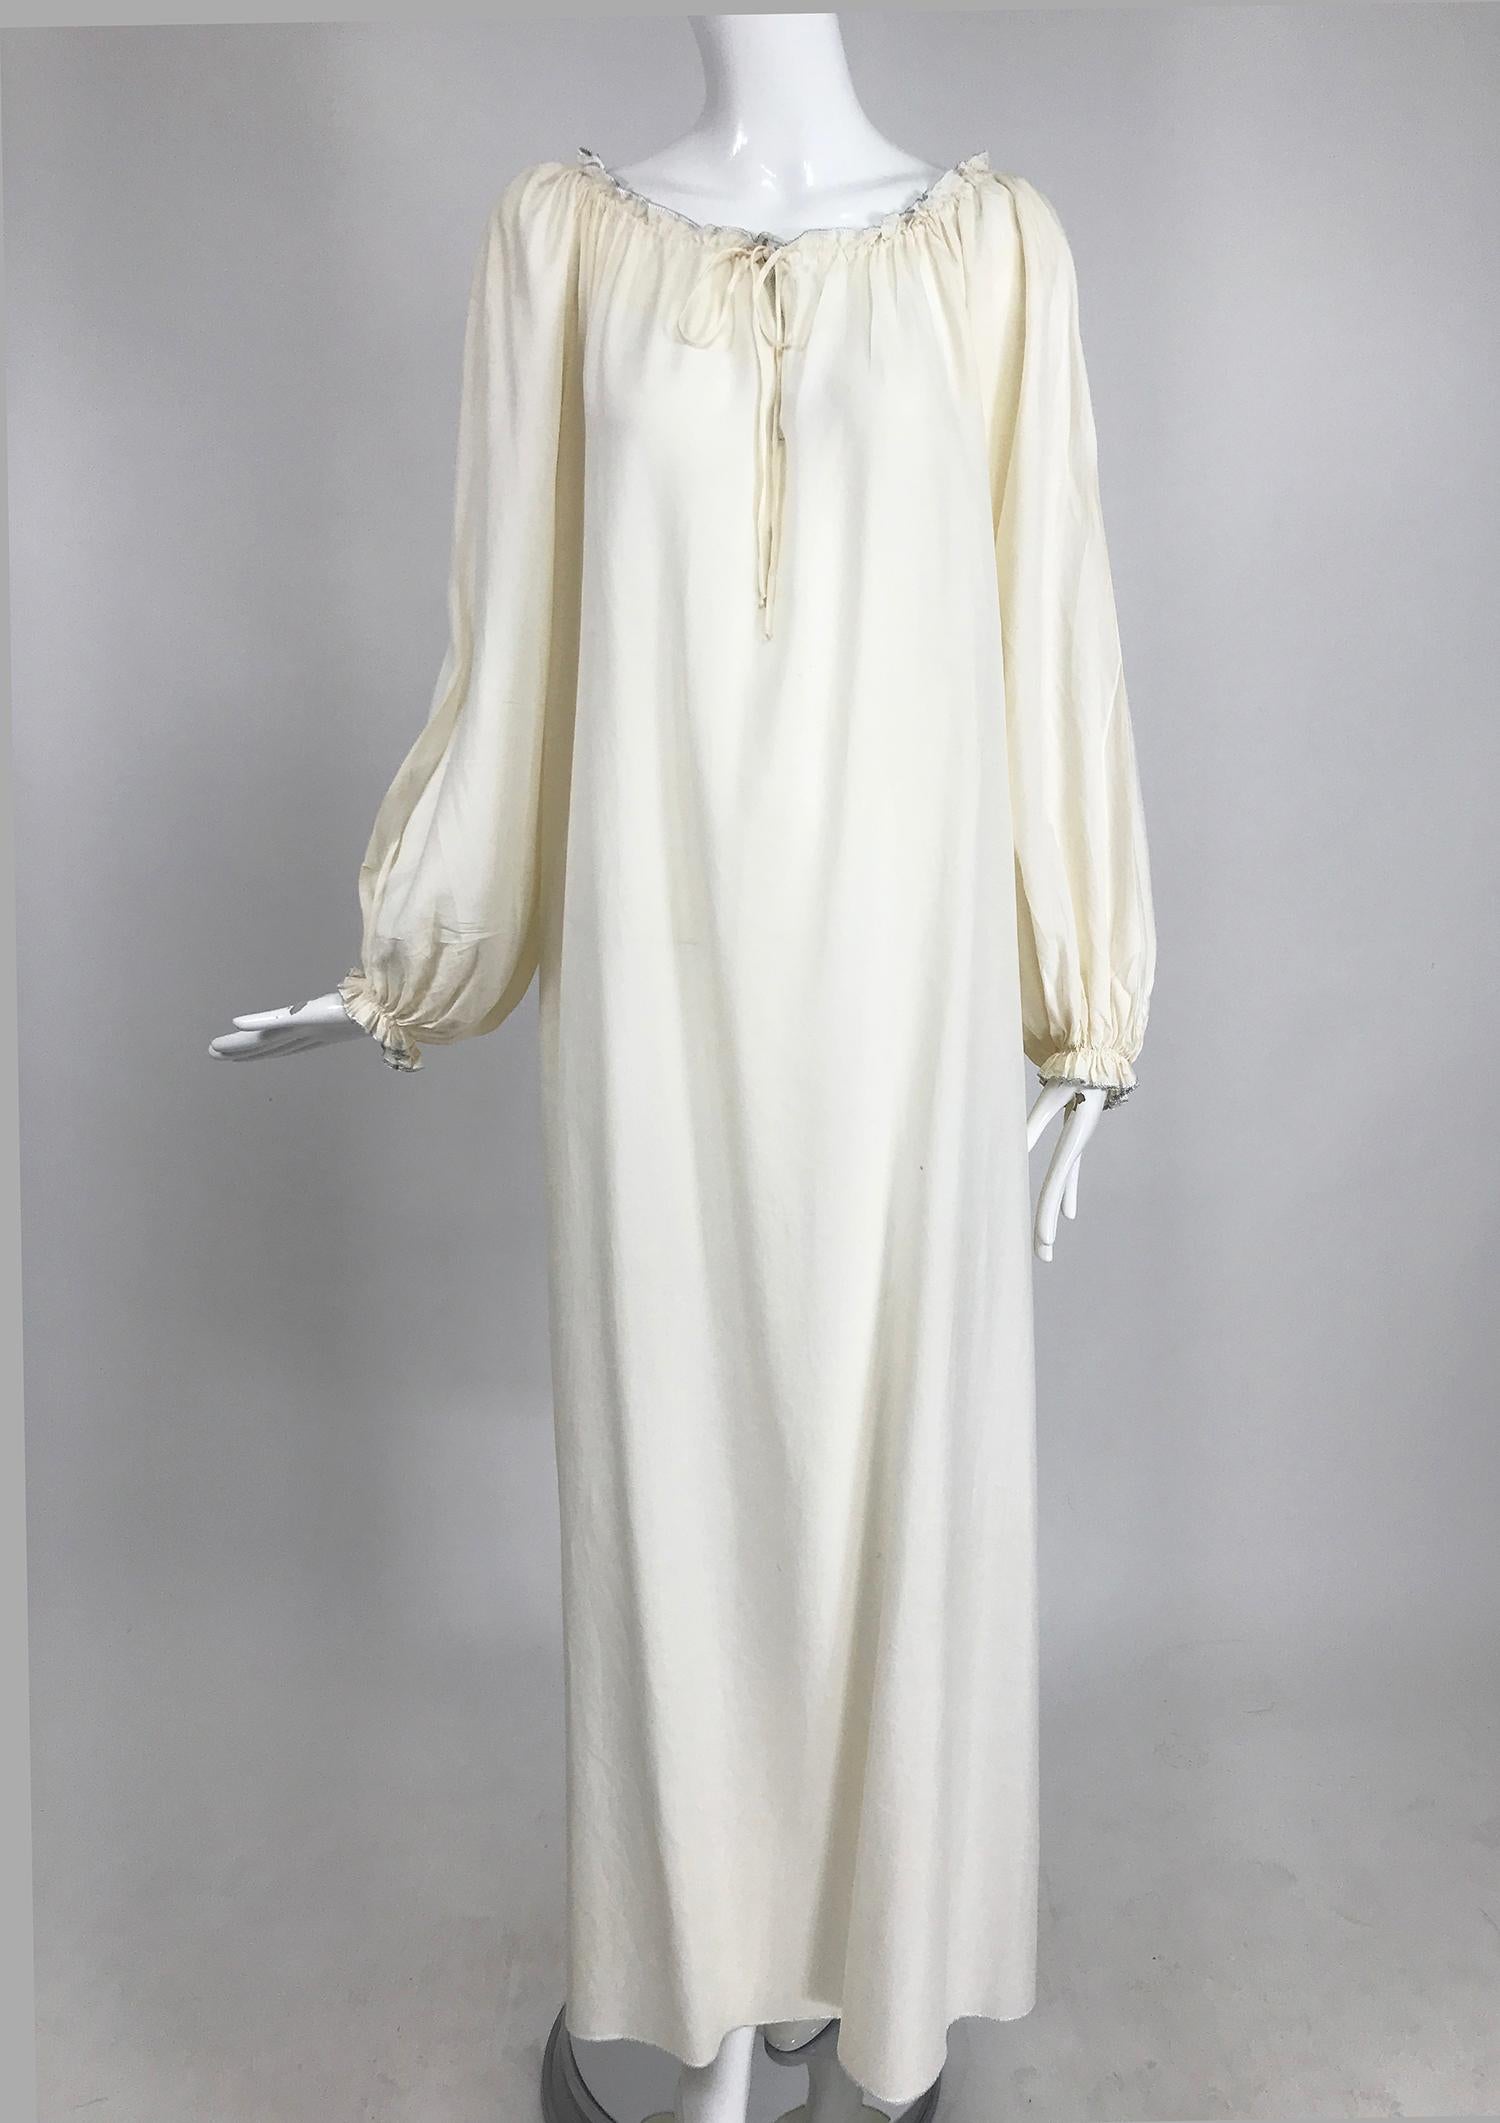 Vintage Fernando Sanchez cream silk bohemian maxi dress from the 1970s. Beautiful dress, the fabric is translucent, great worn with a belt (belt in photo, not included). Pull on dress has an open front drawstring gather, with center vent. Long full